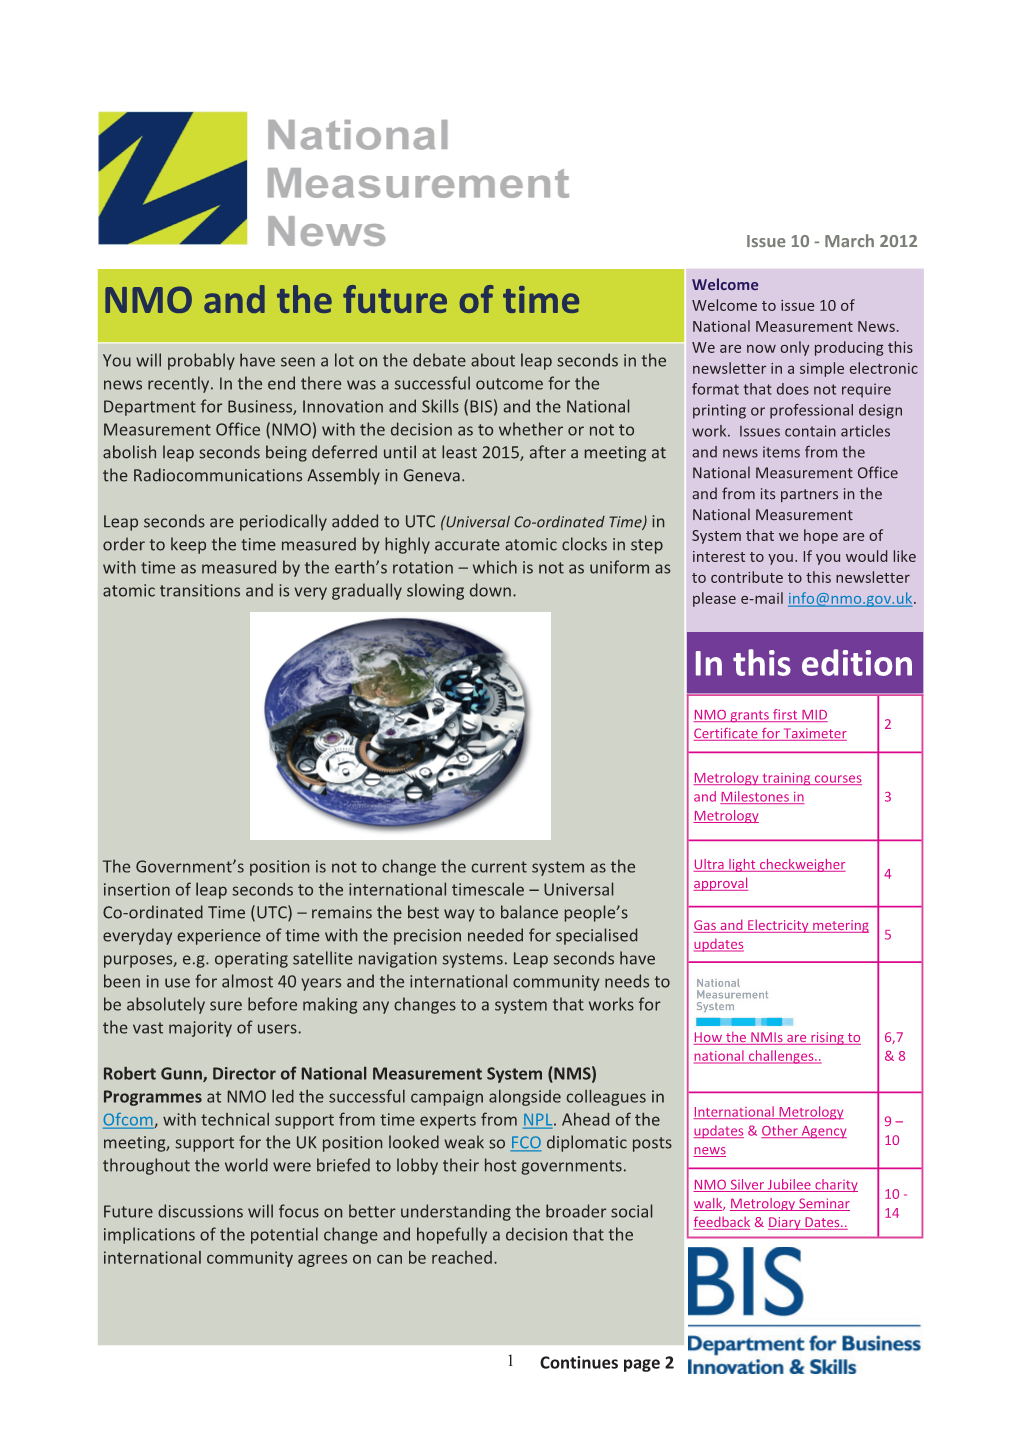 NMO and the Future of Time Welcome to Issue 10 of National Measurement News